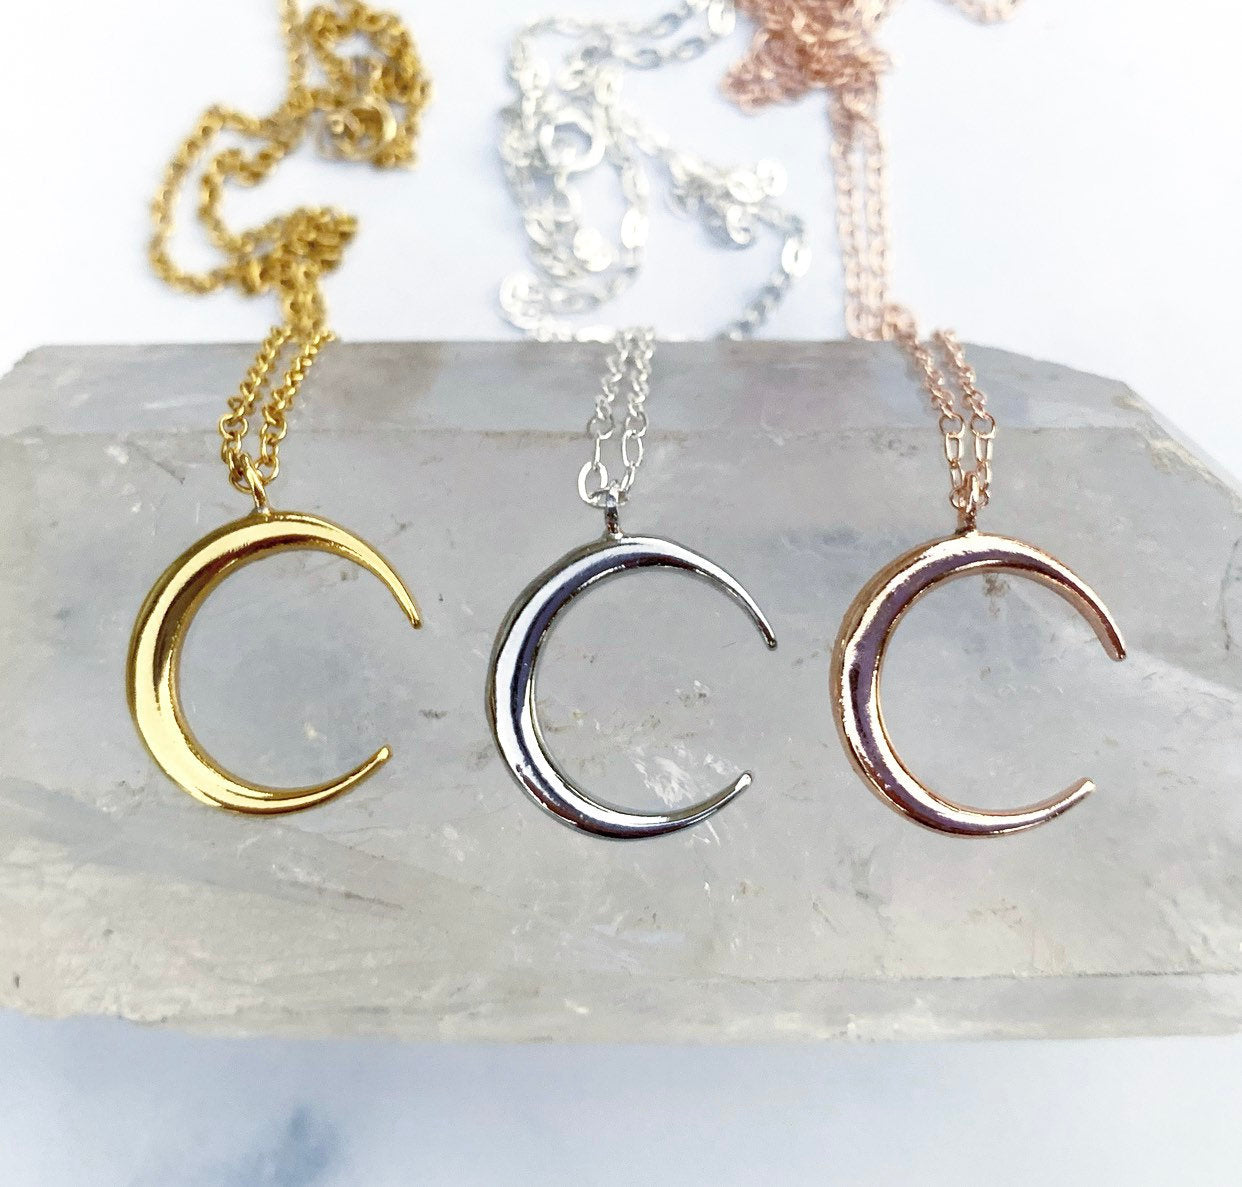 Crescent Moon Necklace, Gold Moon Necklace, Moon Charm Layer Necklace, Celestial Jewelry, Celestial Charm Necklace